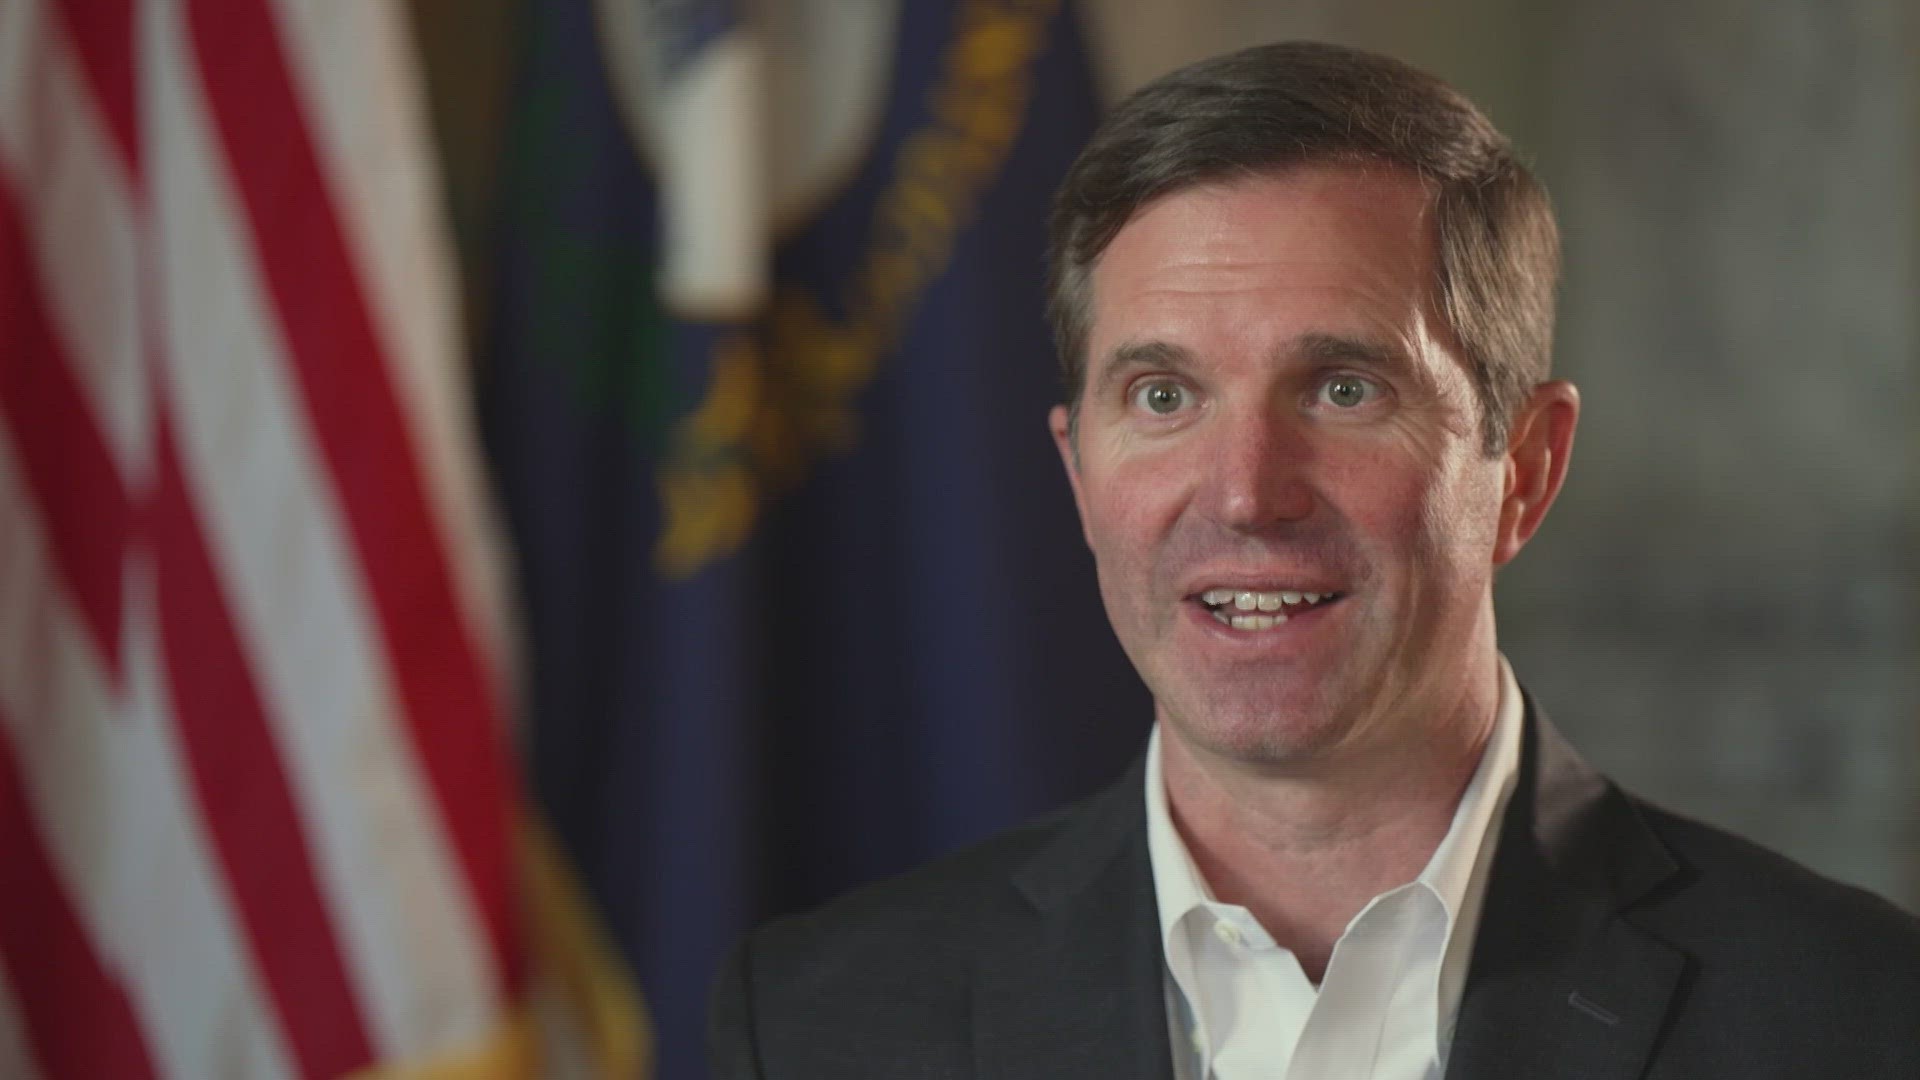 A day after revealing his official budget proposal for the next two fiscal years, Kentucky Gov. Andy Beshear discussed what's ahead for his second term.